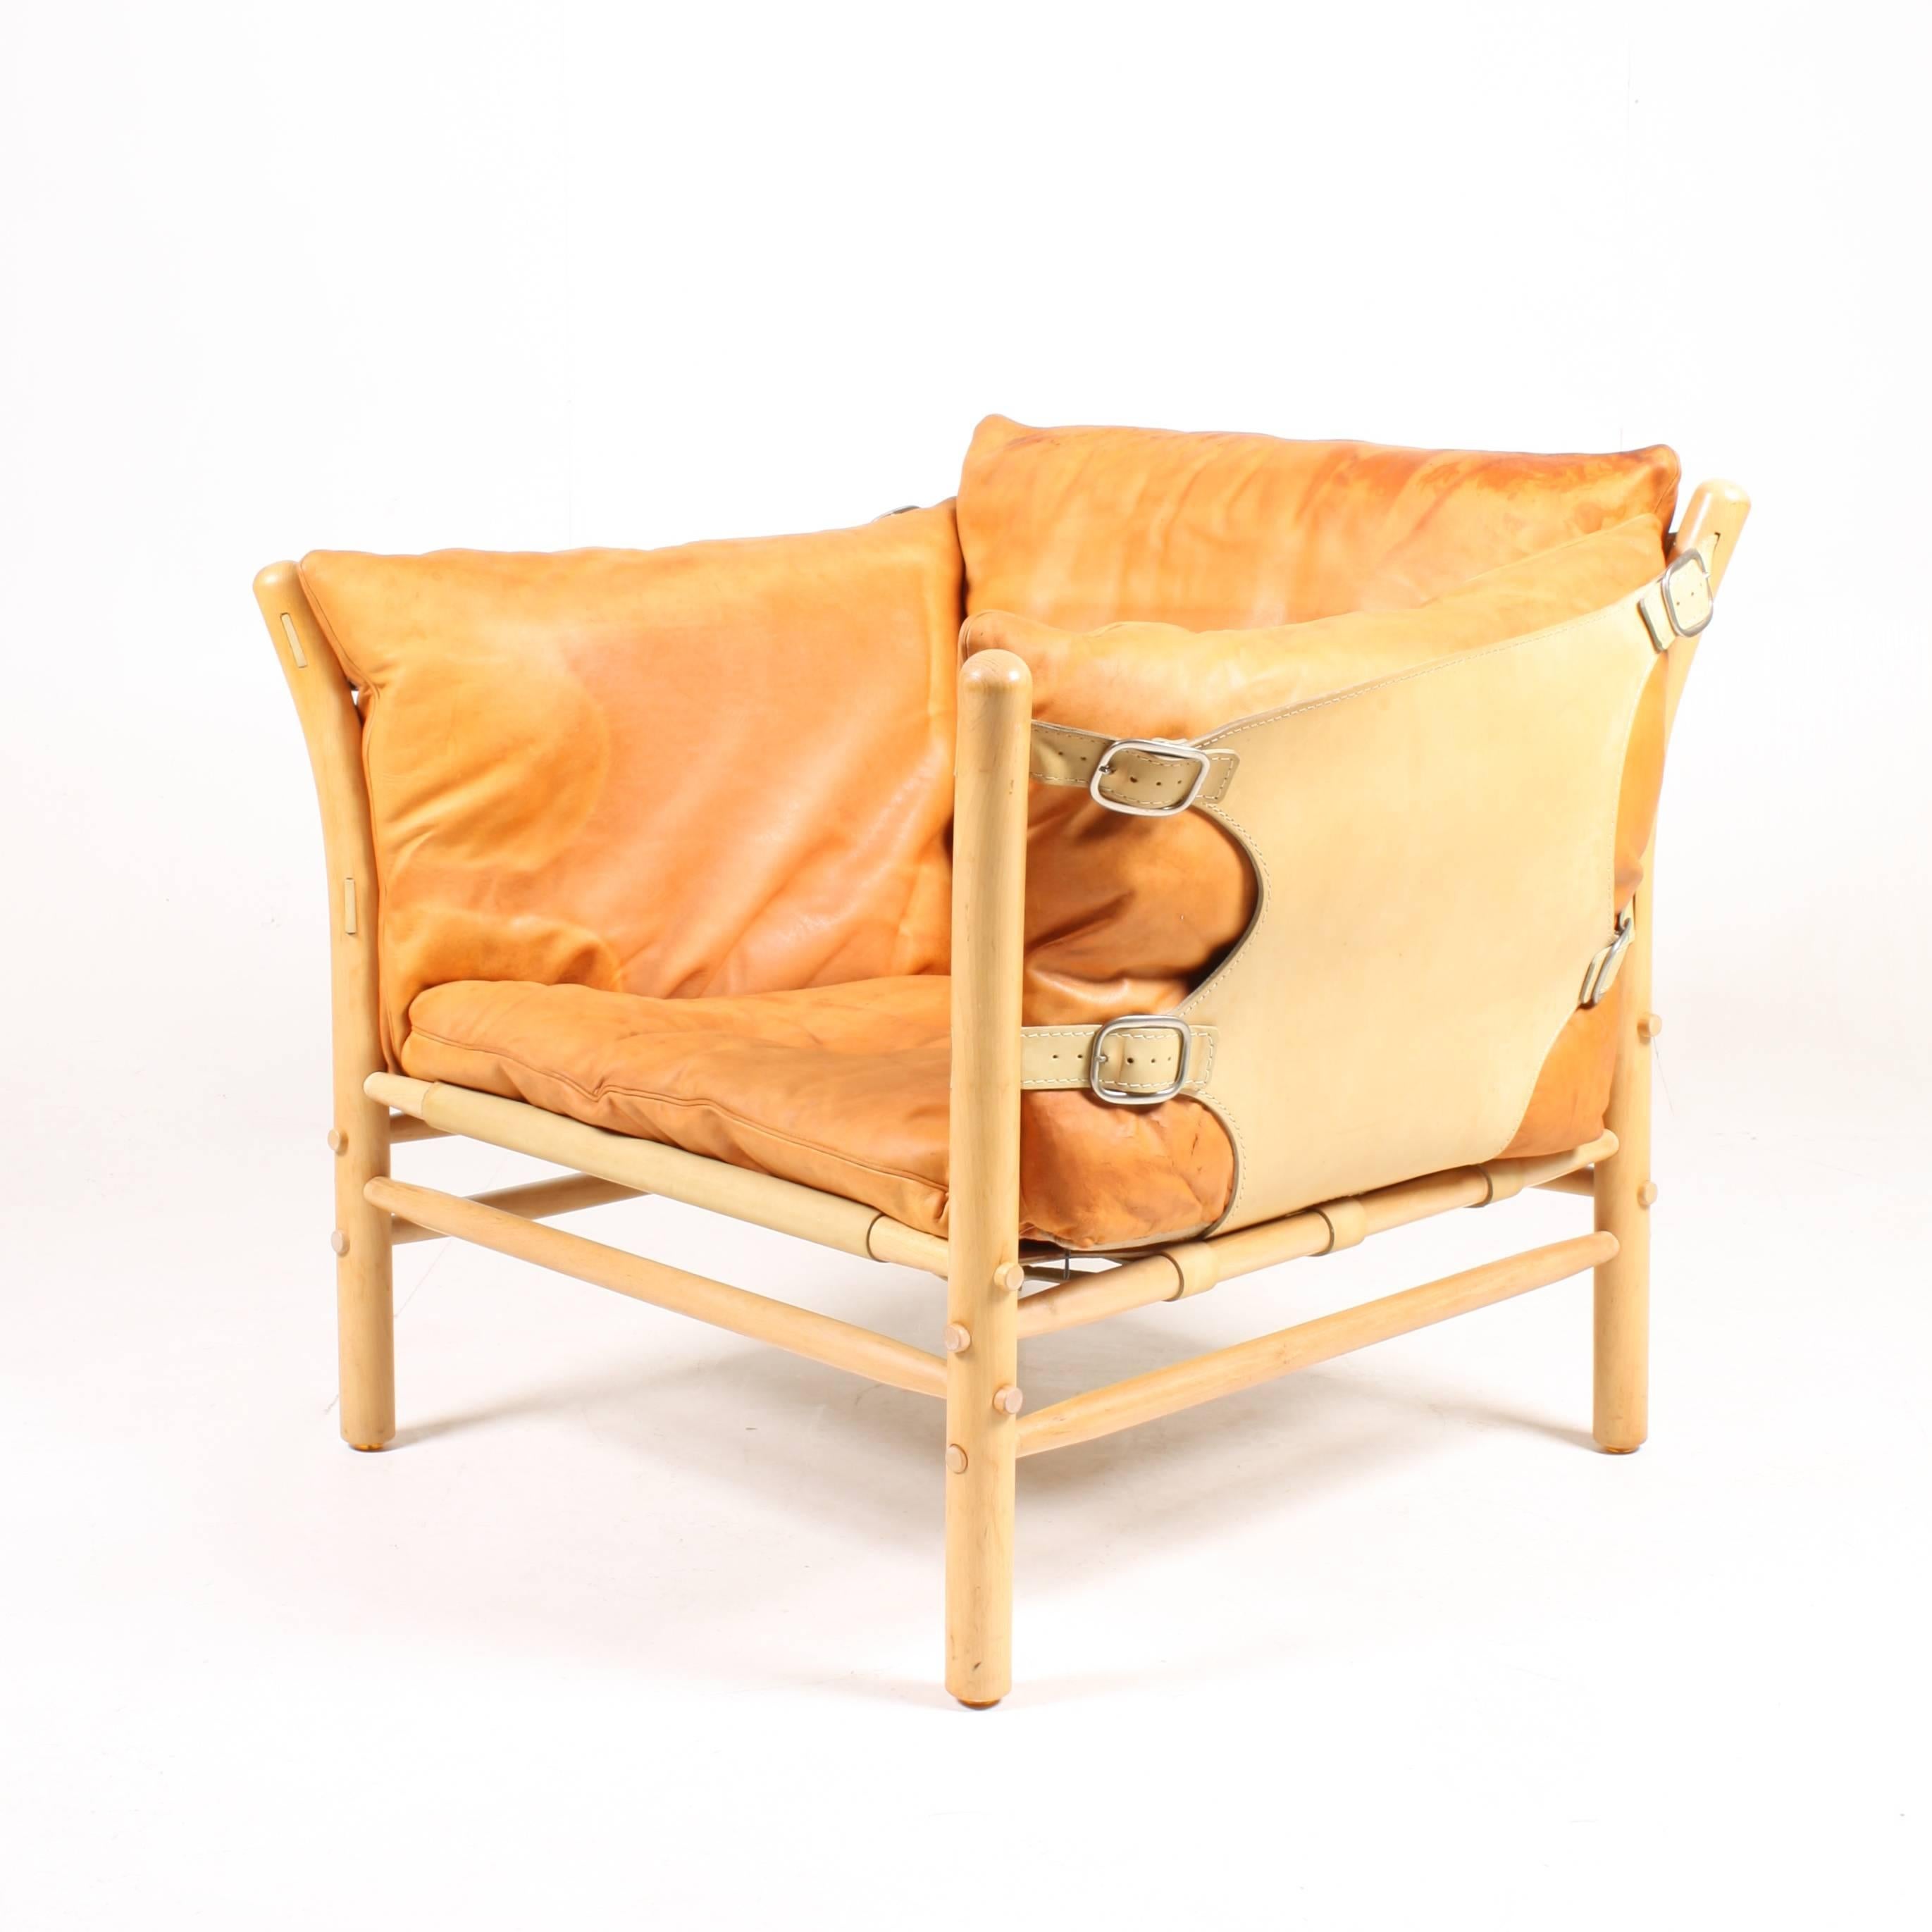 Lounge chair in beautiful patinated leather, wood frame and brass hardware. Model Ilona designed by Swedish architect Arne Norell for Norell Möbel AB in the 1960s.

The chair is cleaned, waxed and is from a non-smoker home. Very nice original